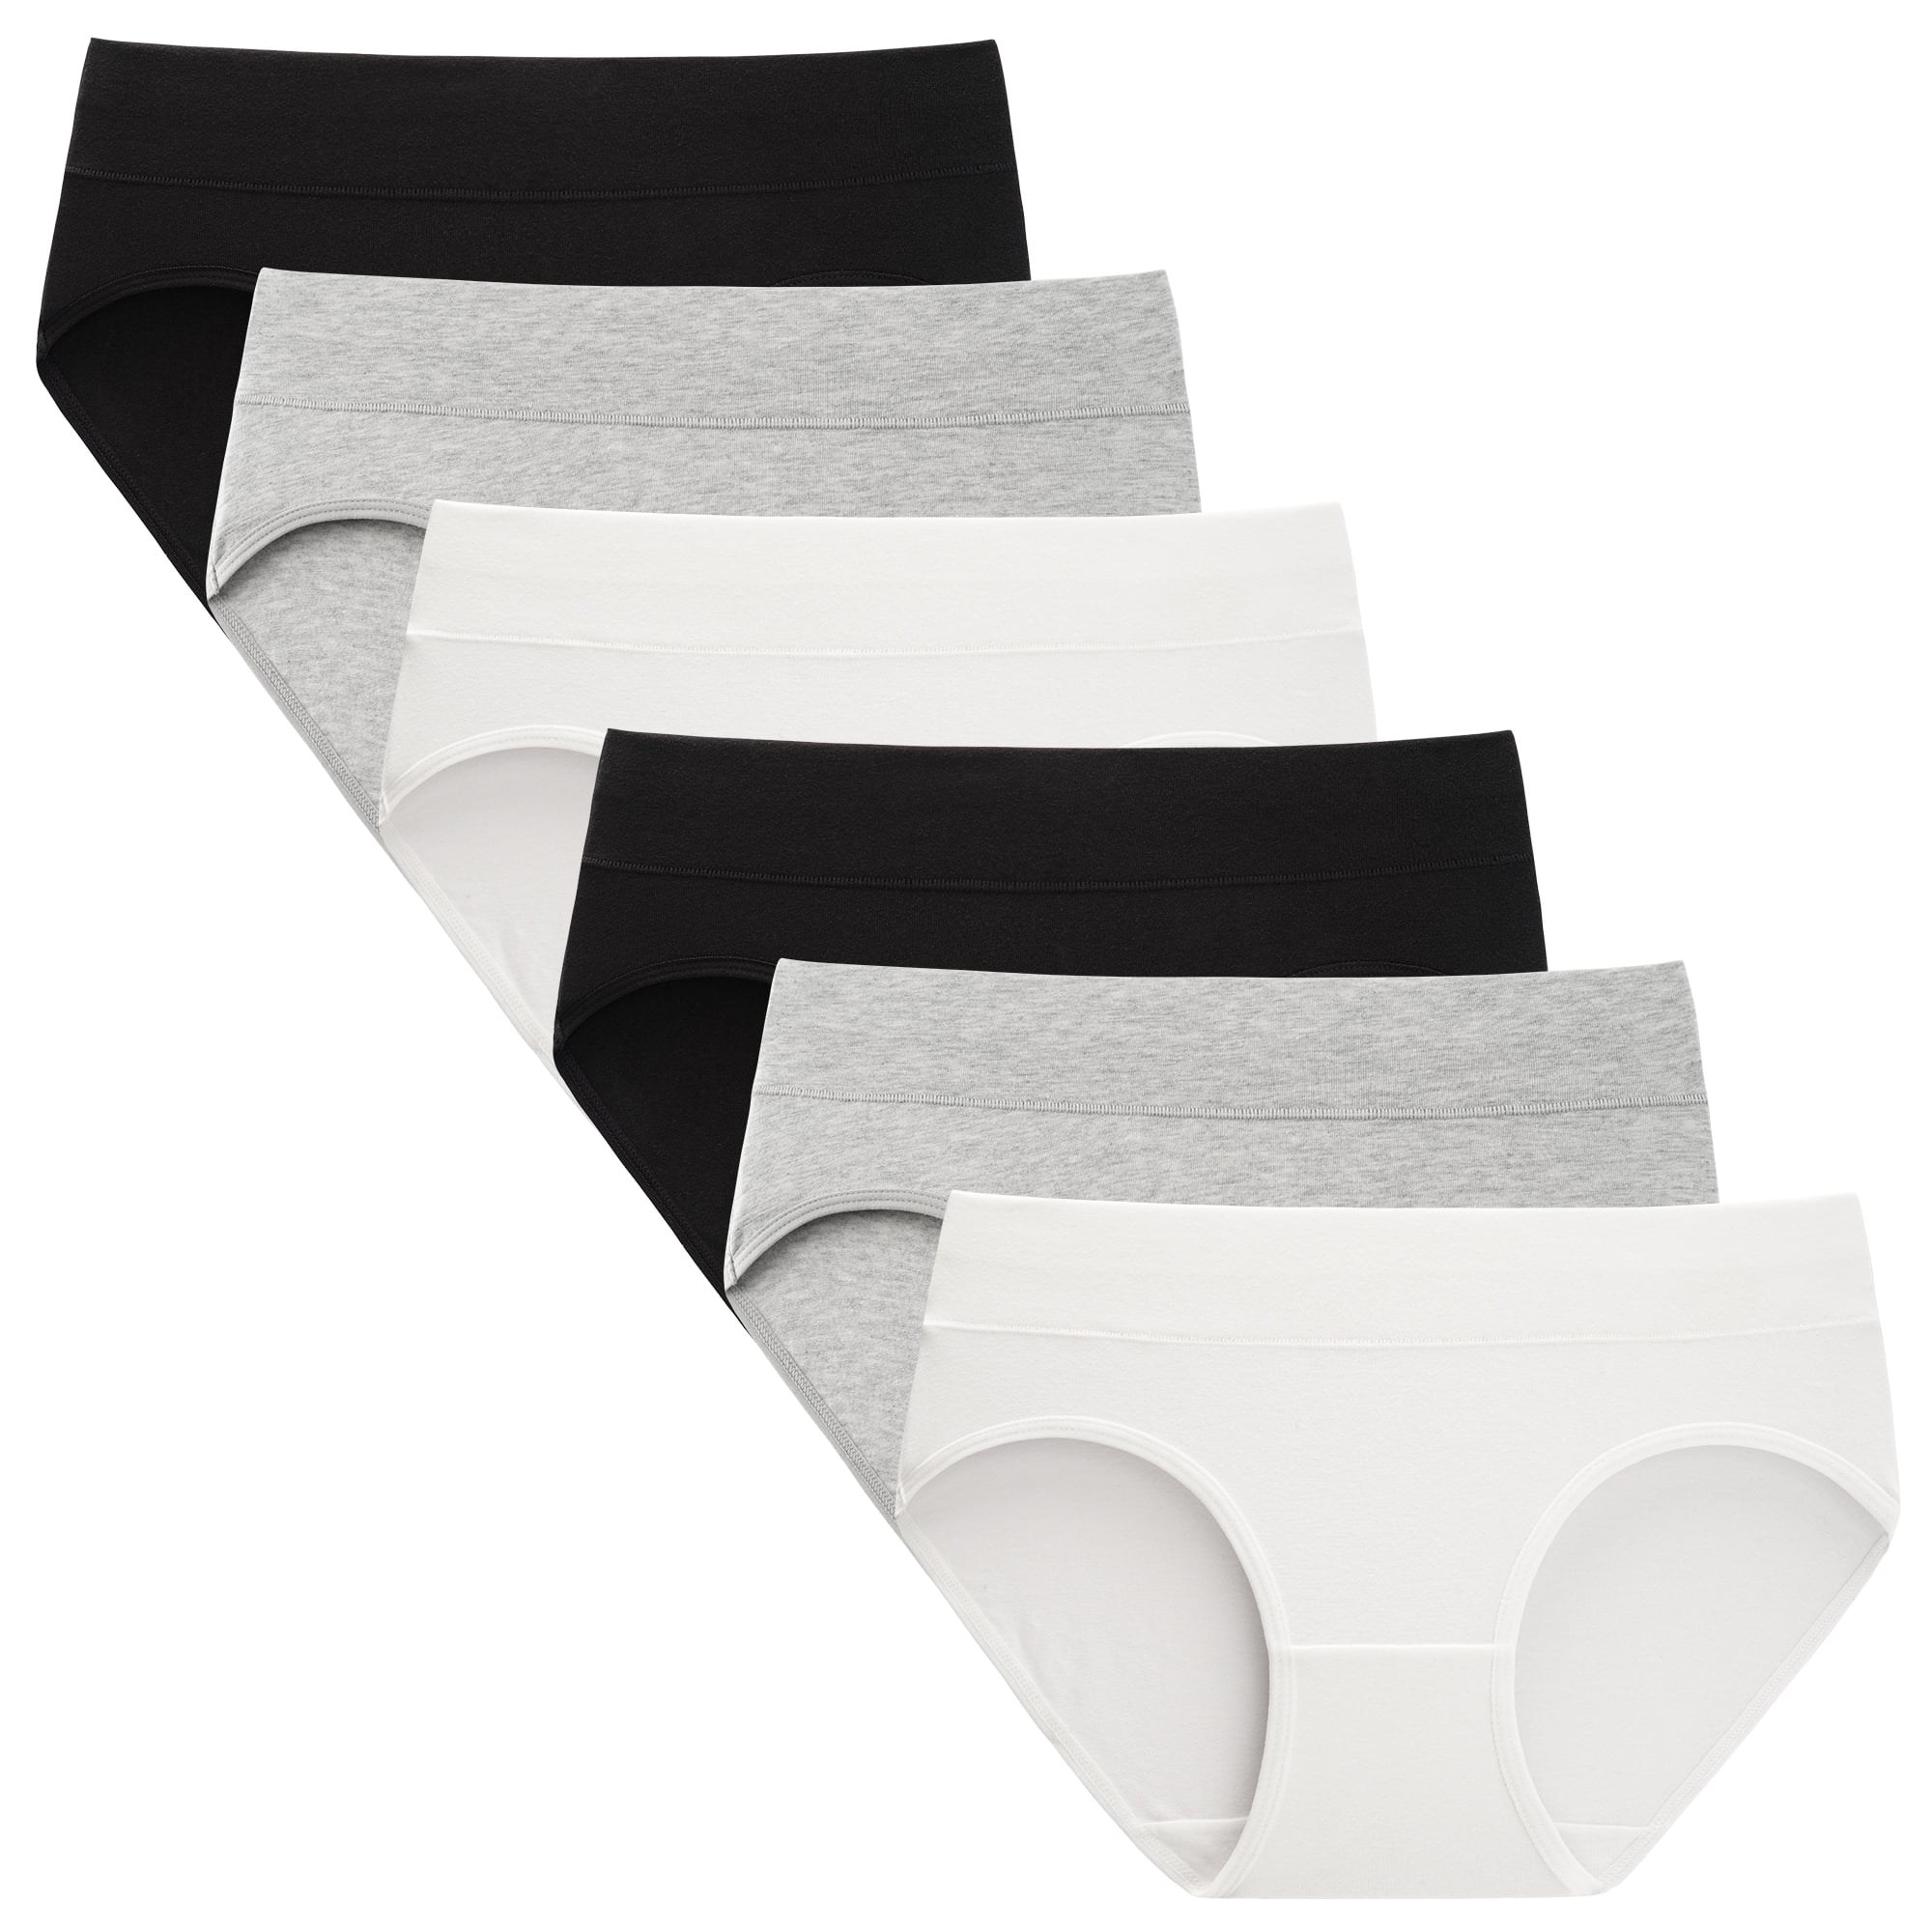 National New Born R.Y.K - IFG DELUXE BRIEF IFG Panty Our classic pure cotton  brief which is great for everyday wear. Composition: 100% Cotton Knitted  Fabric. Color: Black, White, Skin. Sizes: S /